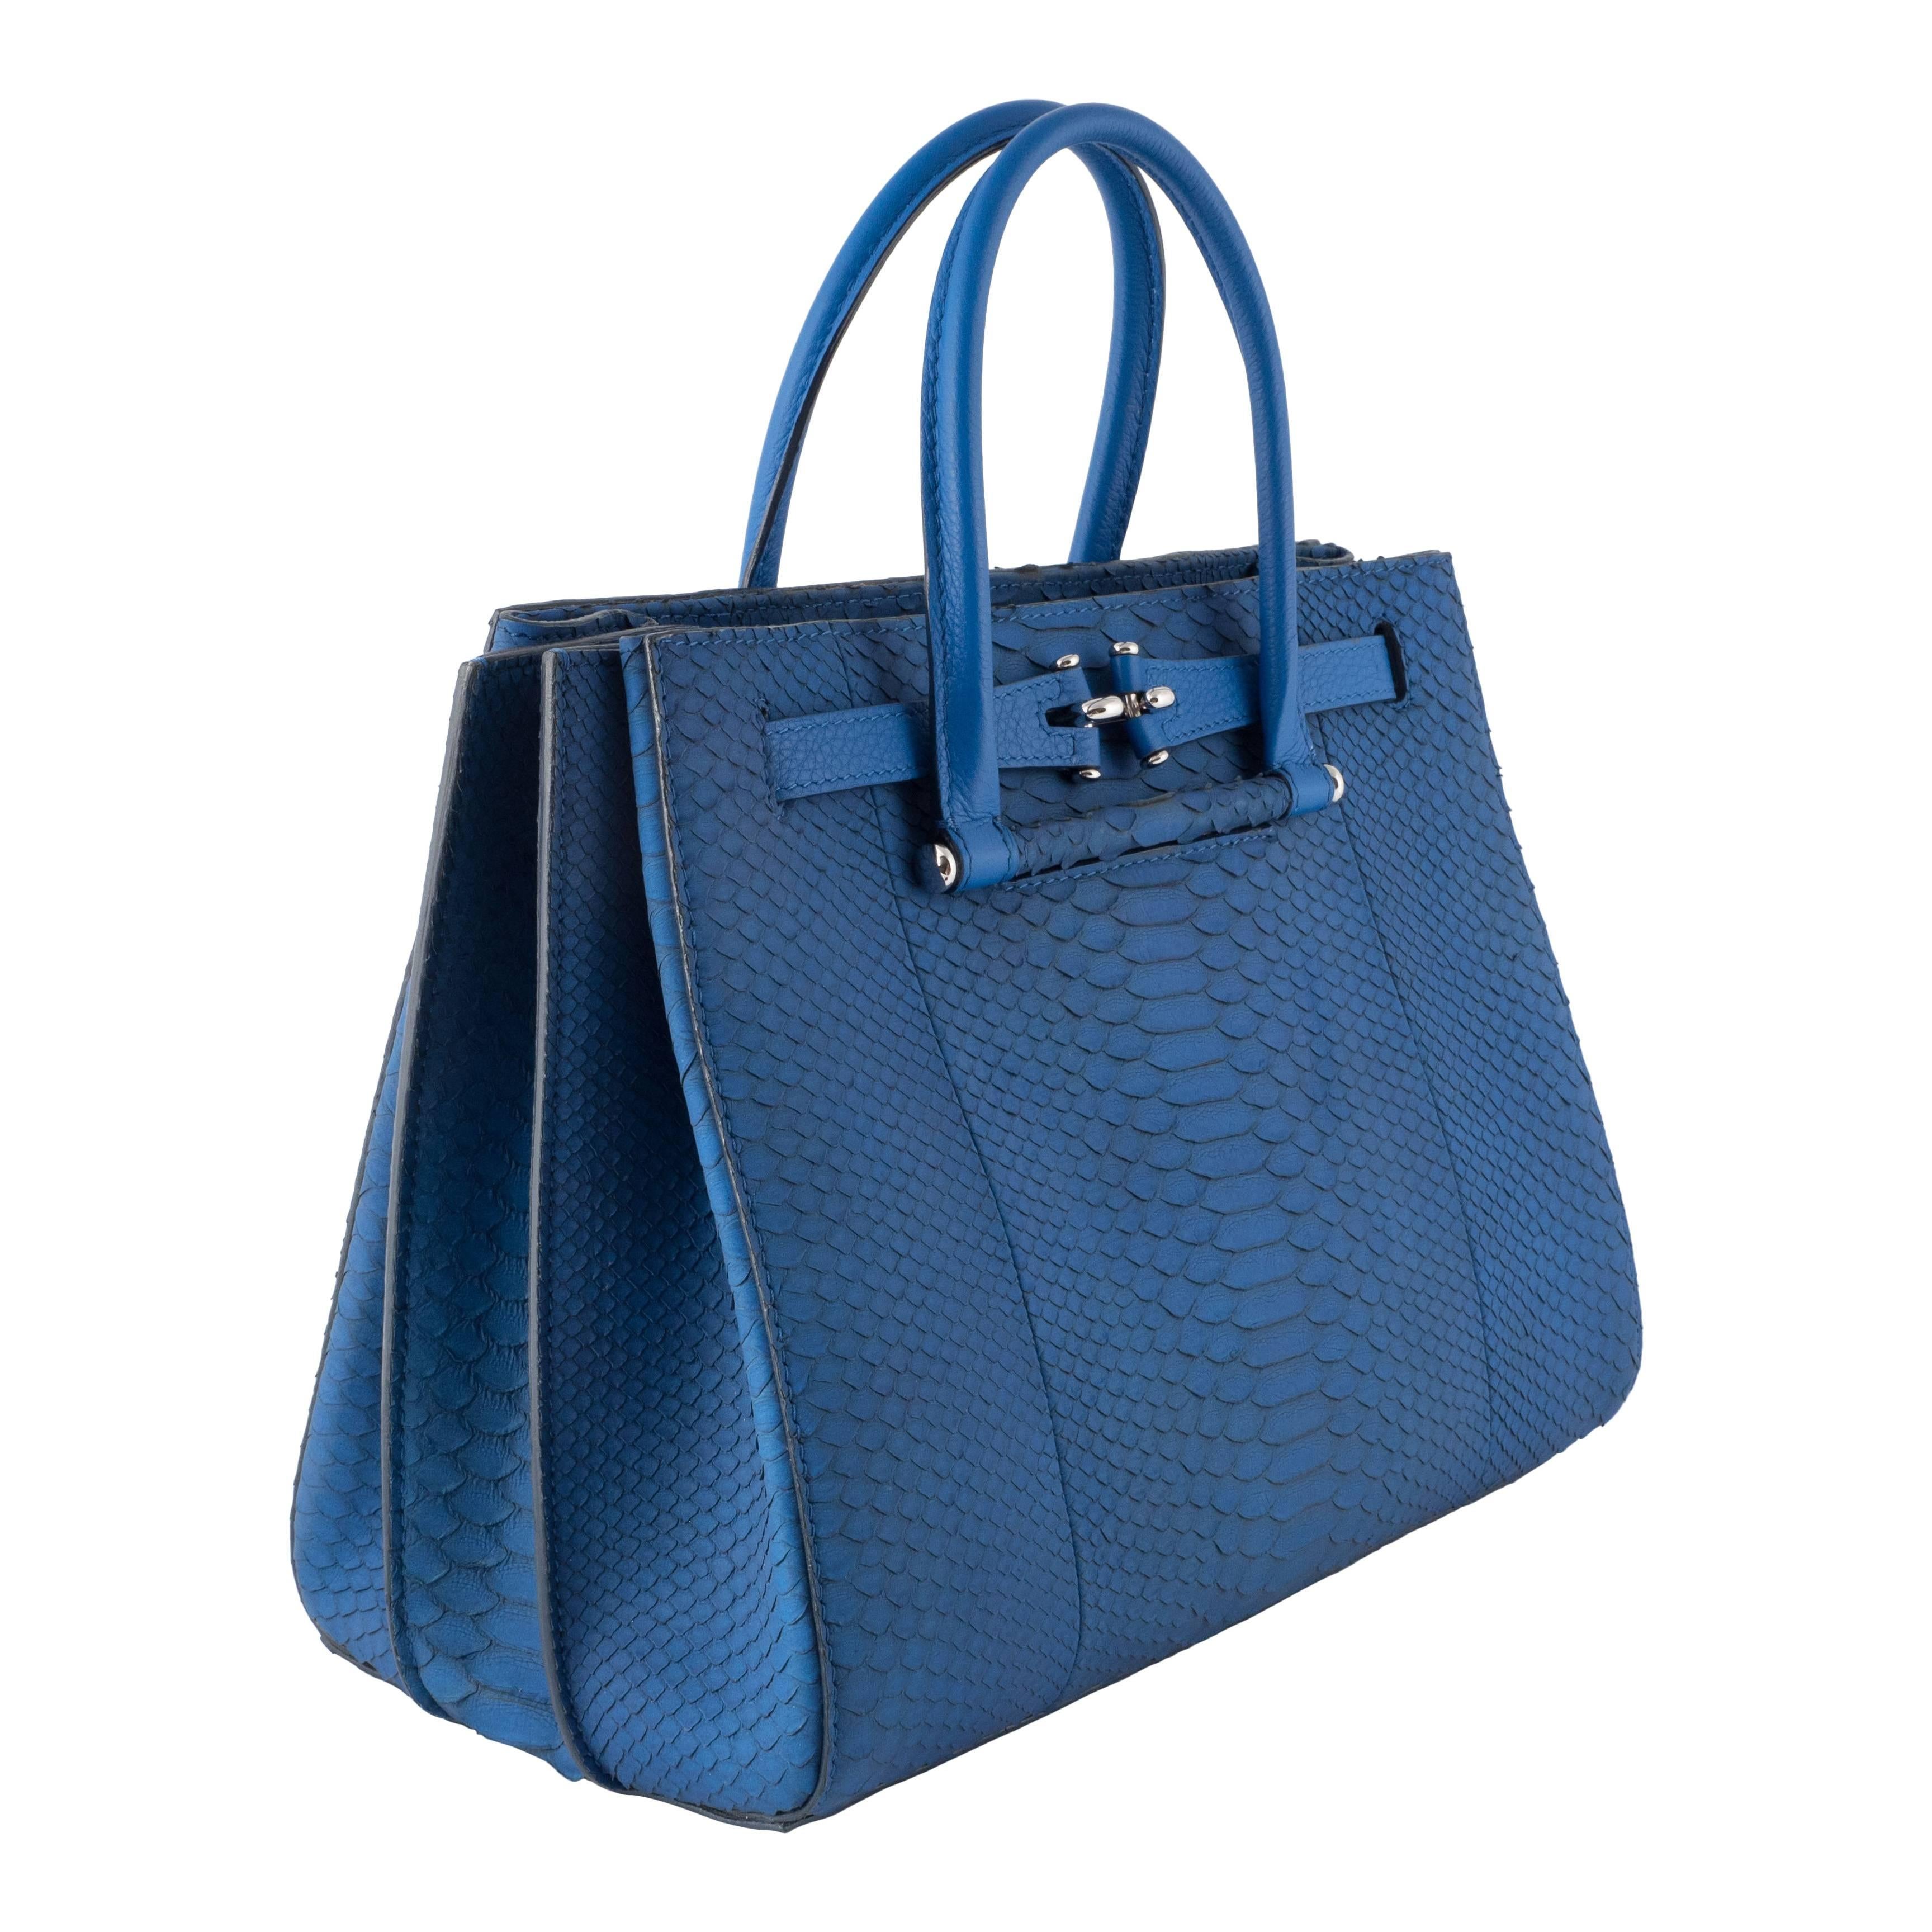 - VBH is an exclusive Italian luxury accessory house based in Roma and has own atelier in Florence where all the bags are made with best materials and by the best artisans in Italy.
- The bag is inspired by the Madison Avenue lifestyle in New York